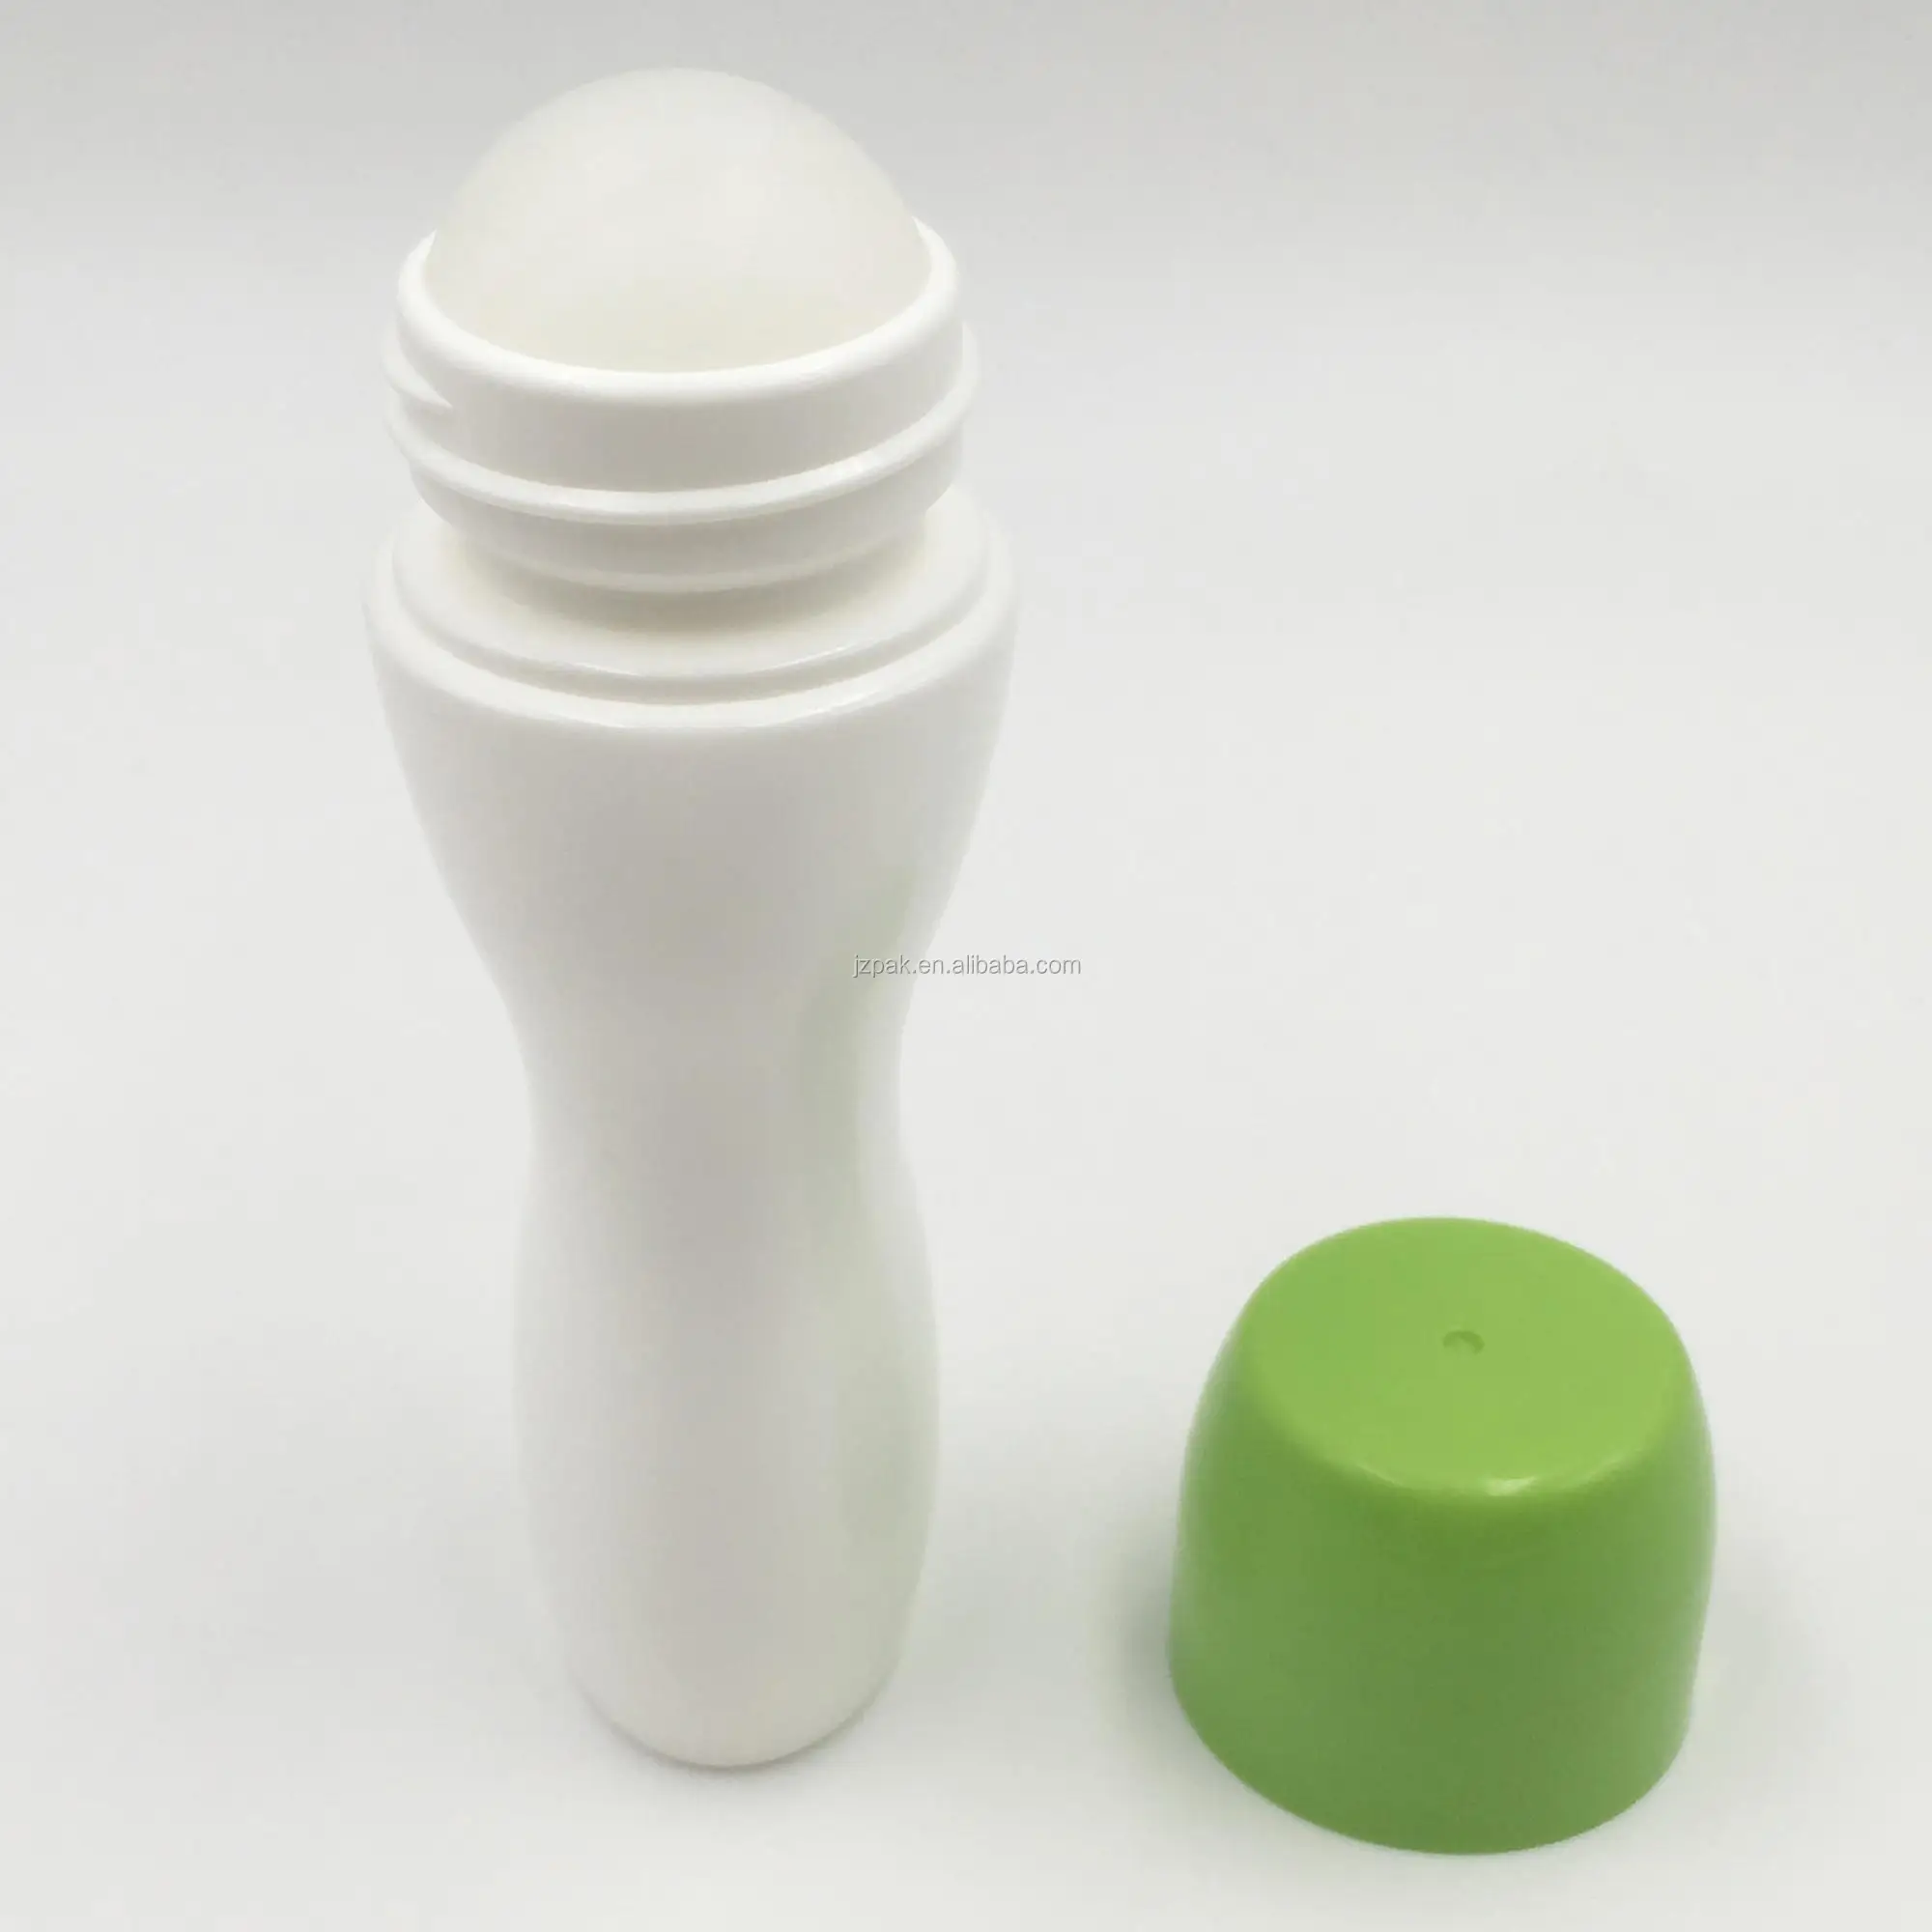 PP roll on bottle 50ml plastic deodorant bottle with pp ball cosmetic deodorant roller container